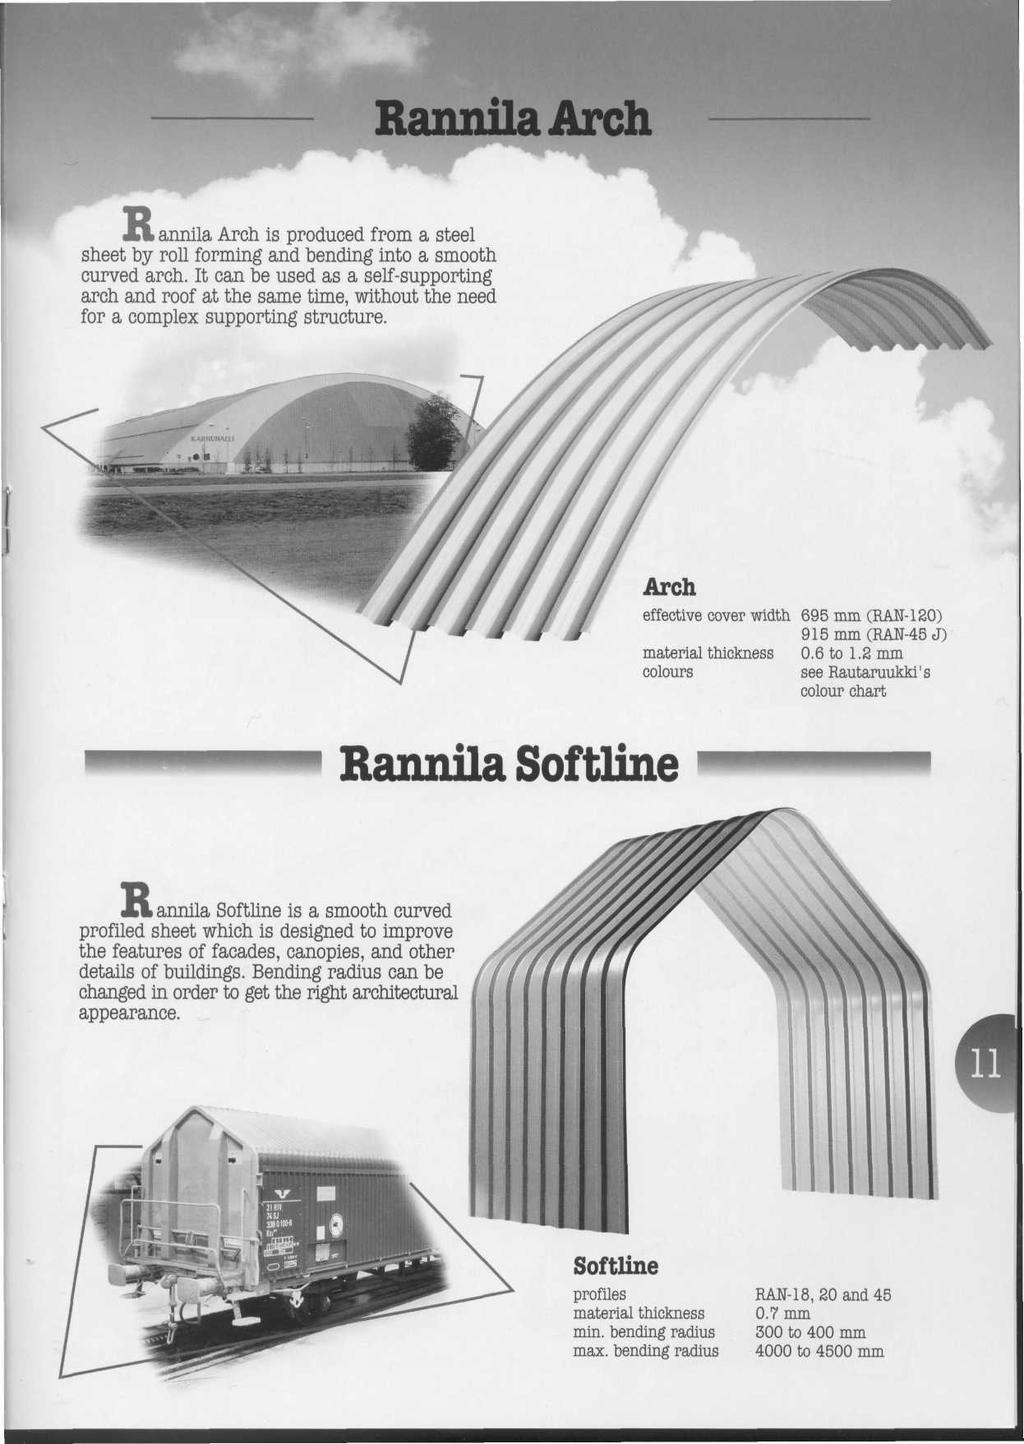 RanmlaArch > annila Arch, is produced from a steel sheet by roll forming and bending into a smooth curved arch.